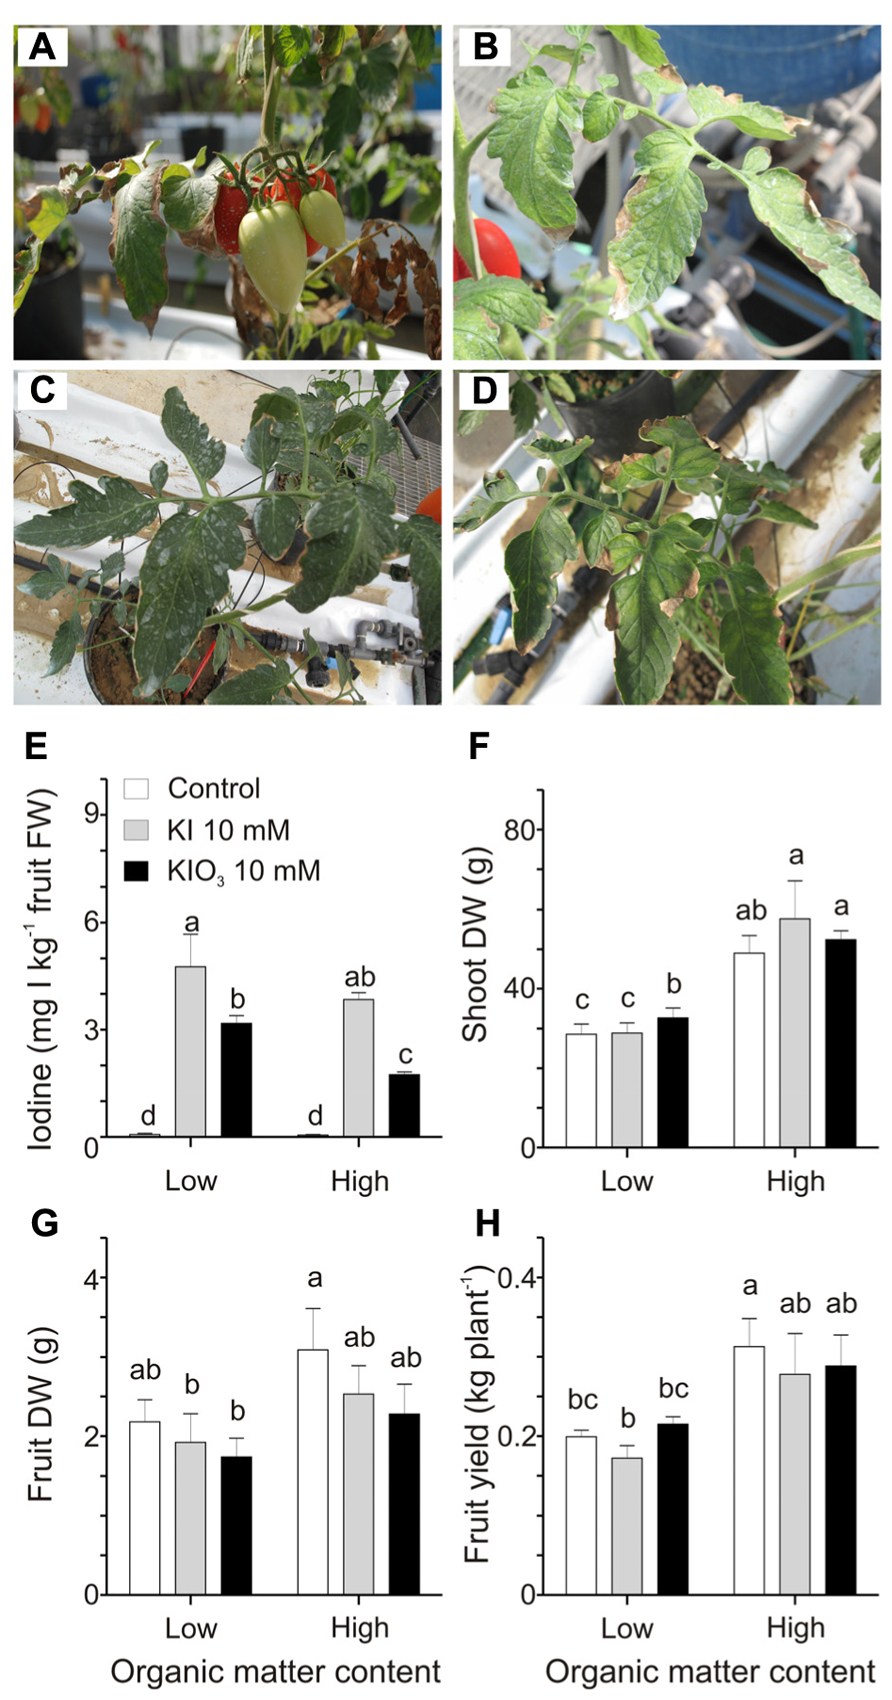 Frontiers Tomato Fruits A Good Target For Iodine Biofortification Plant Science